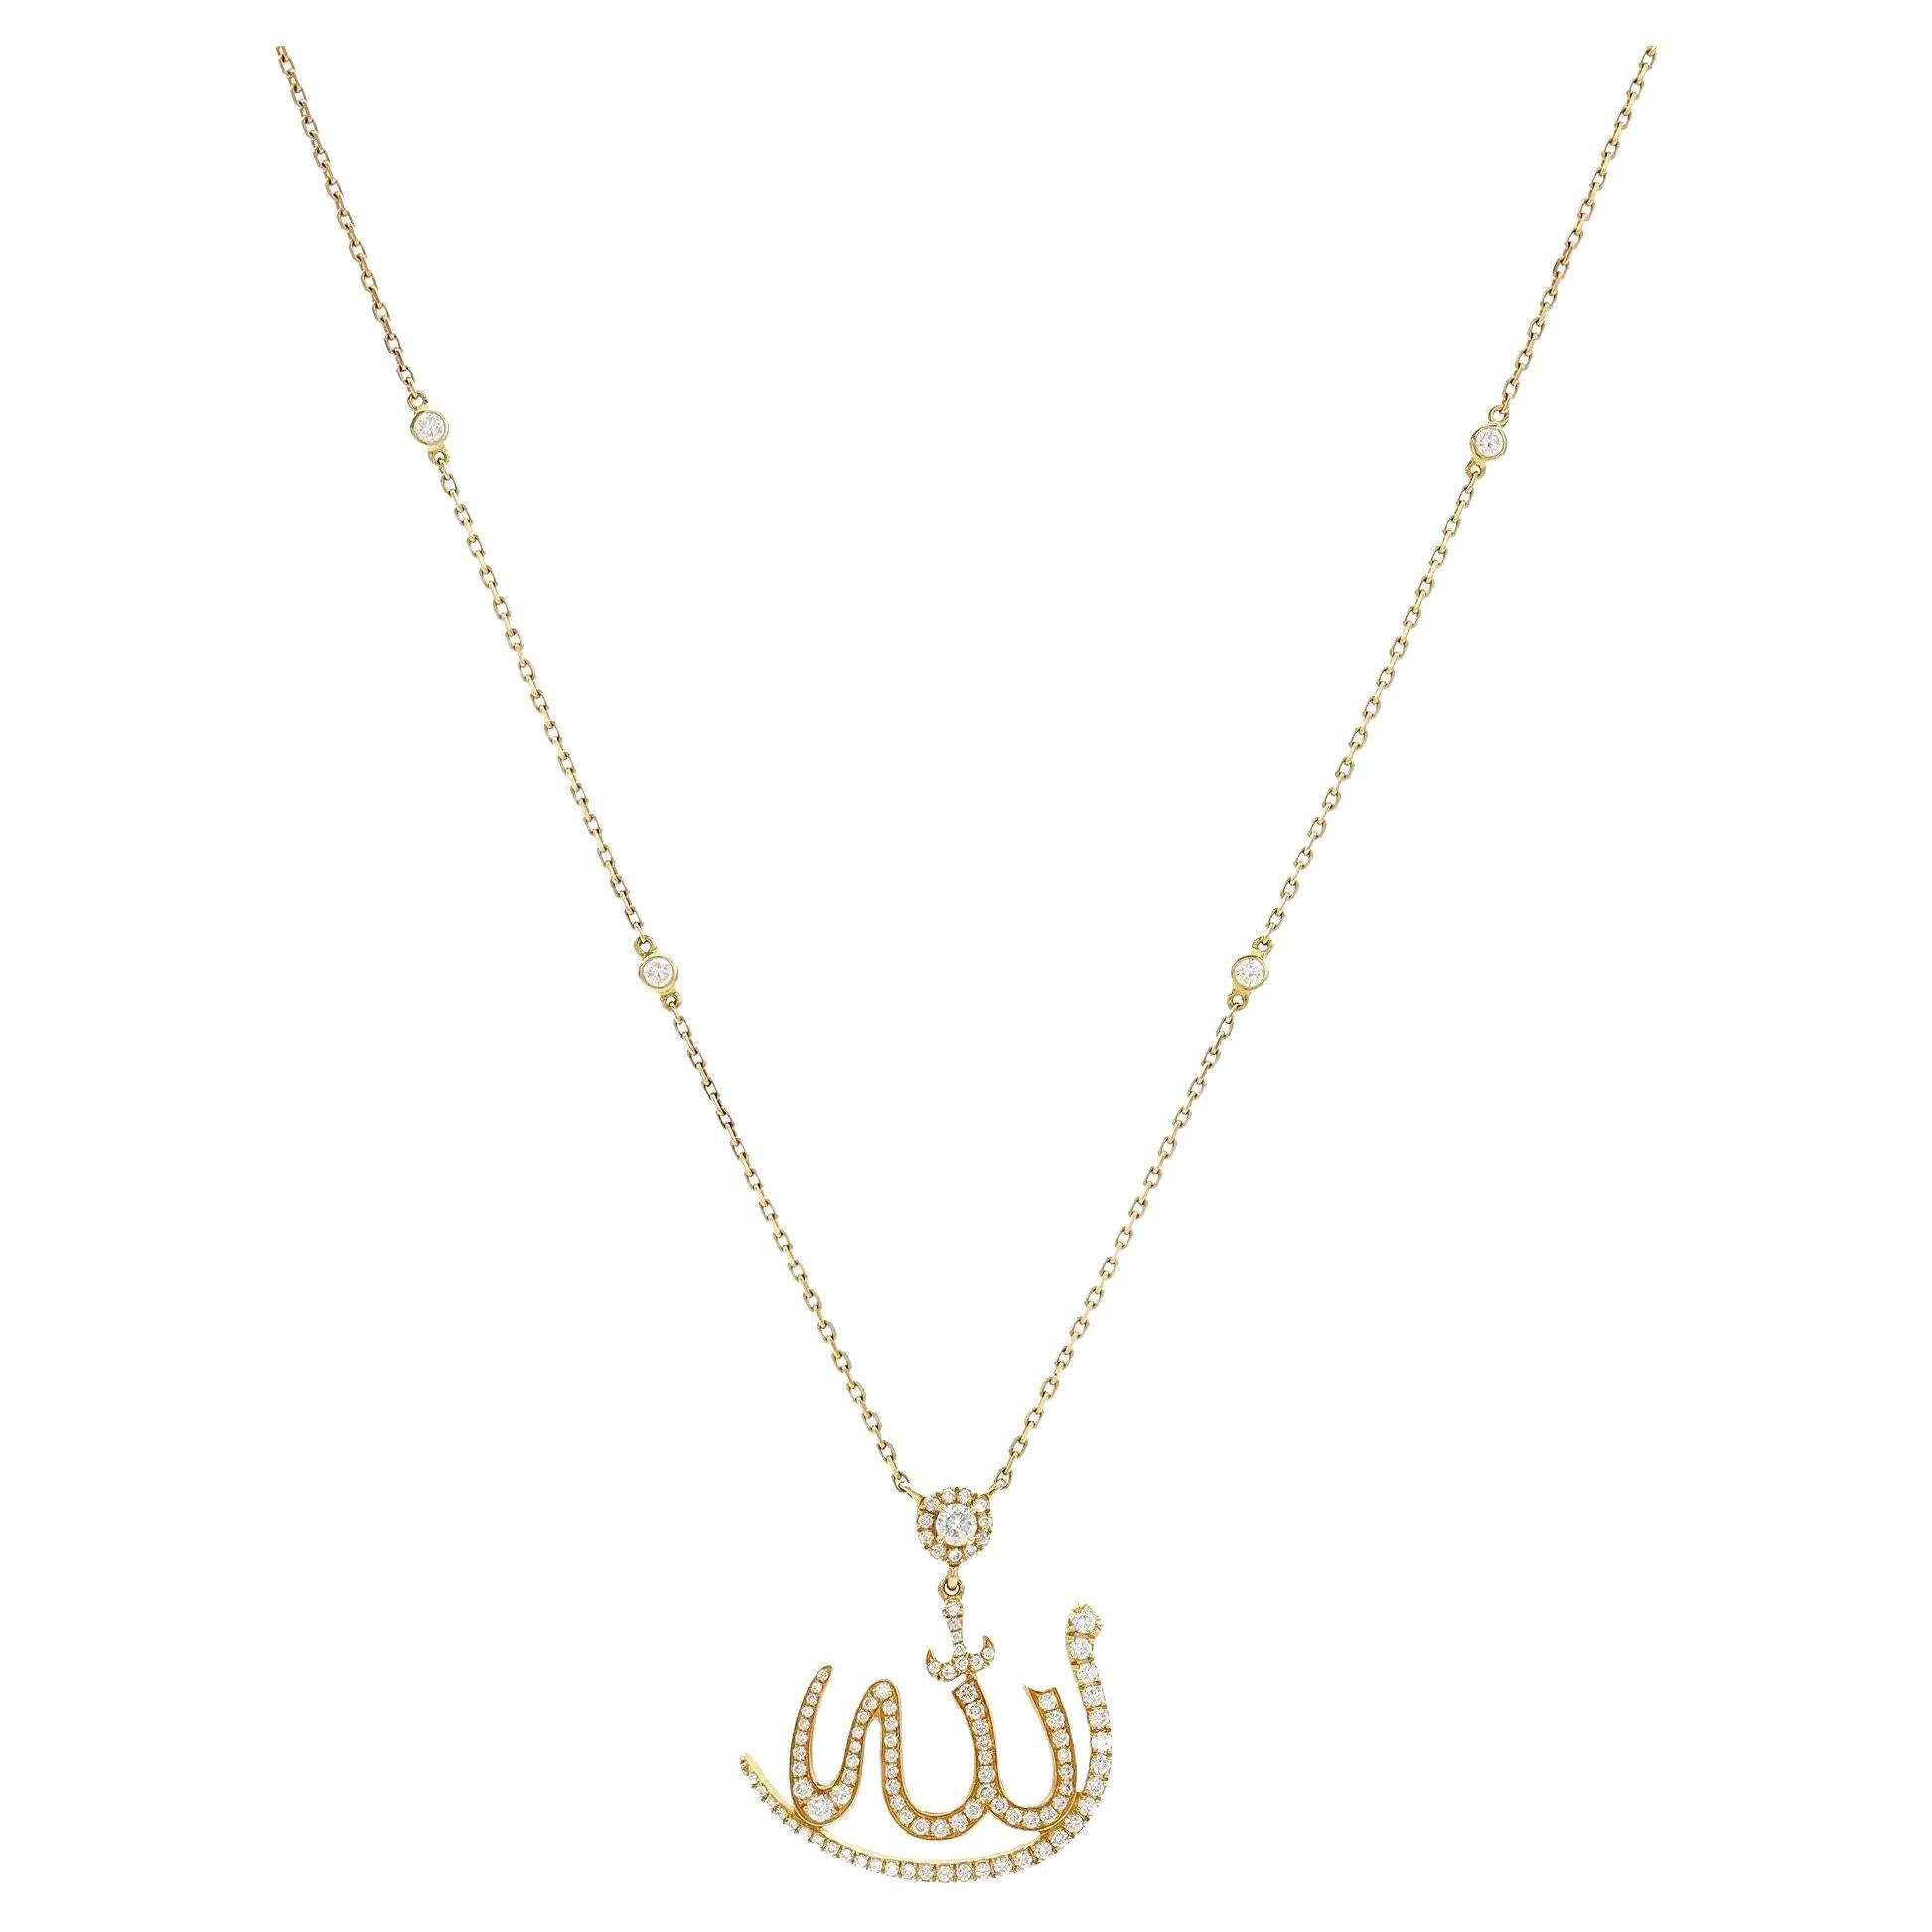 Messika 0.46Ctw Allah Faith Diamond Pendant Necklace 18K Yellow Gold 17.5 Inches For Sale